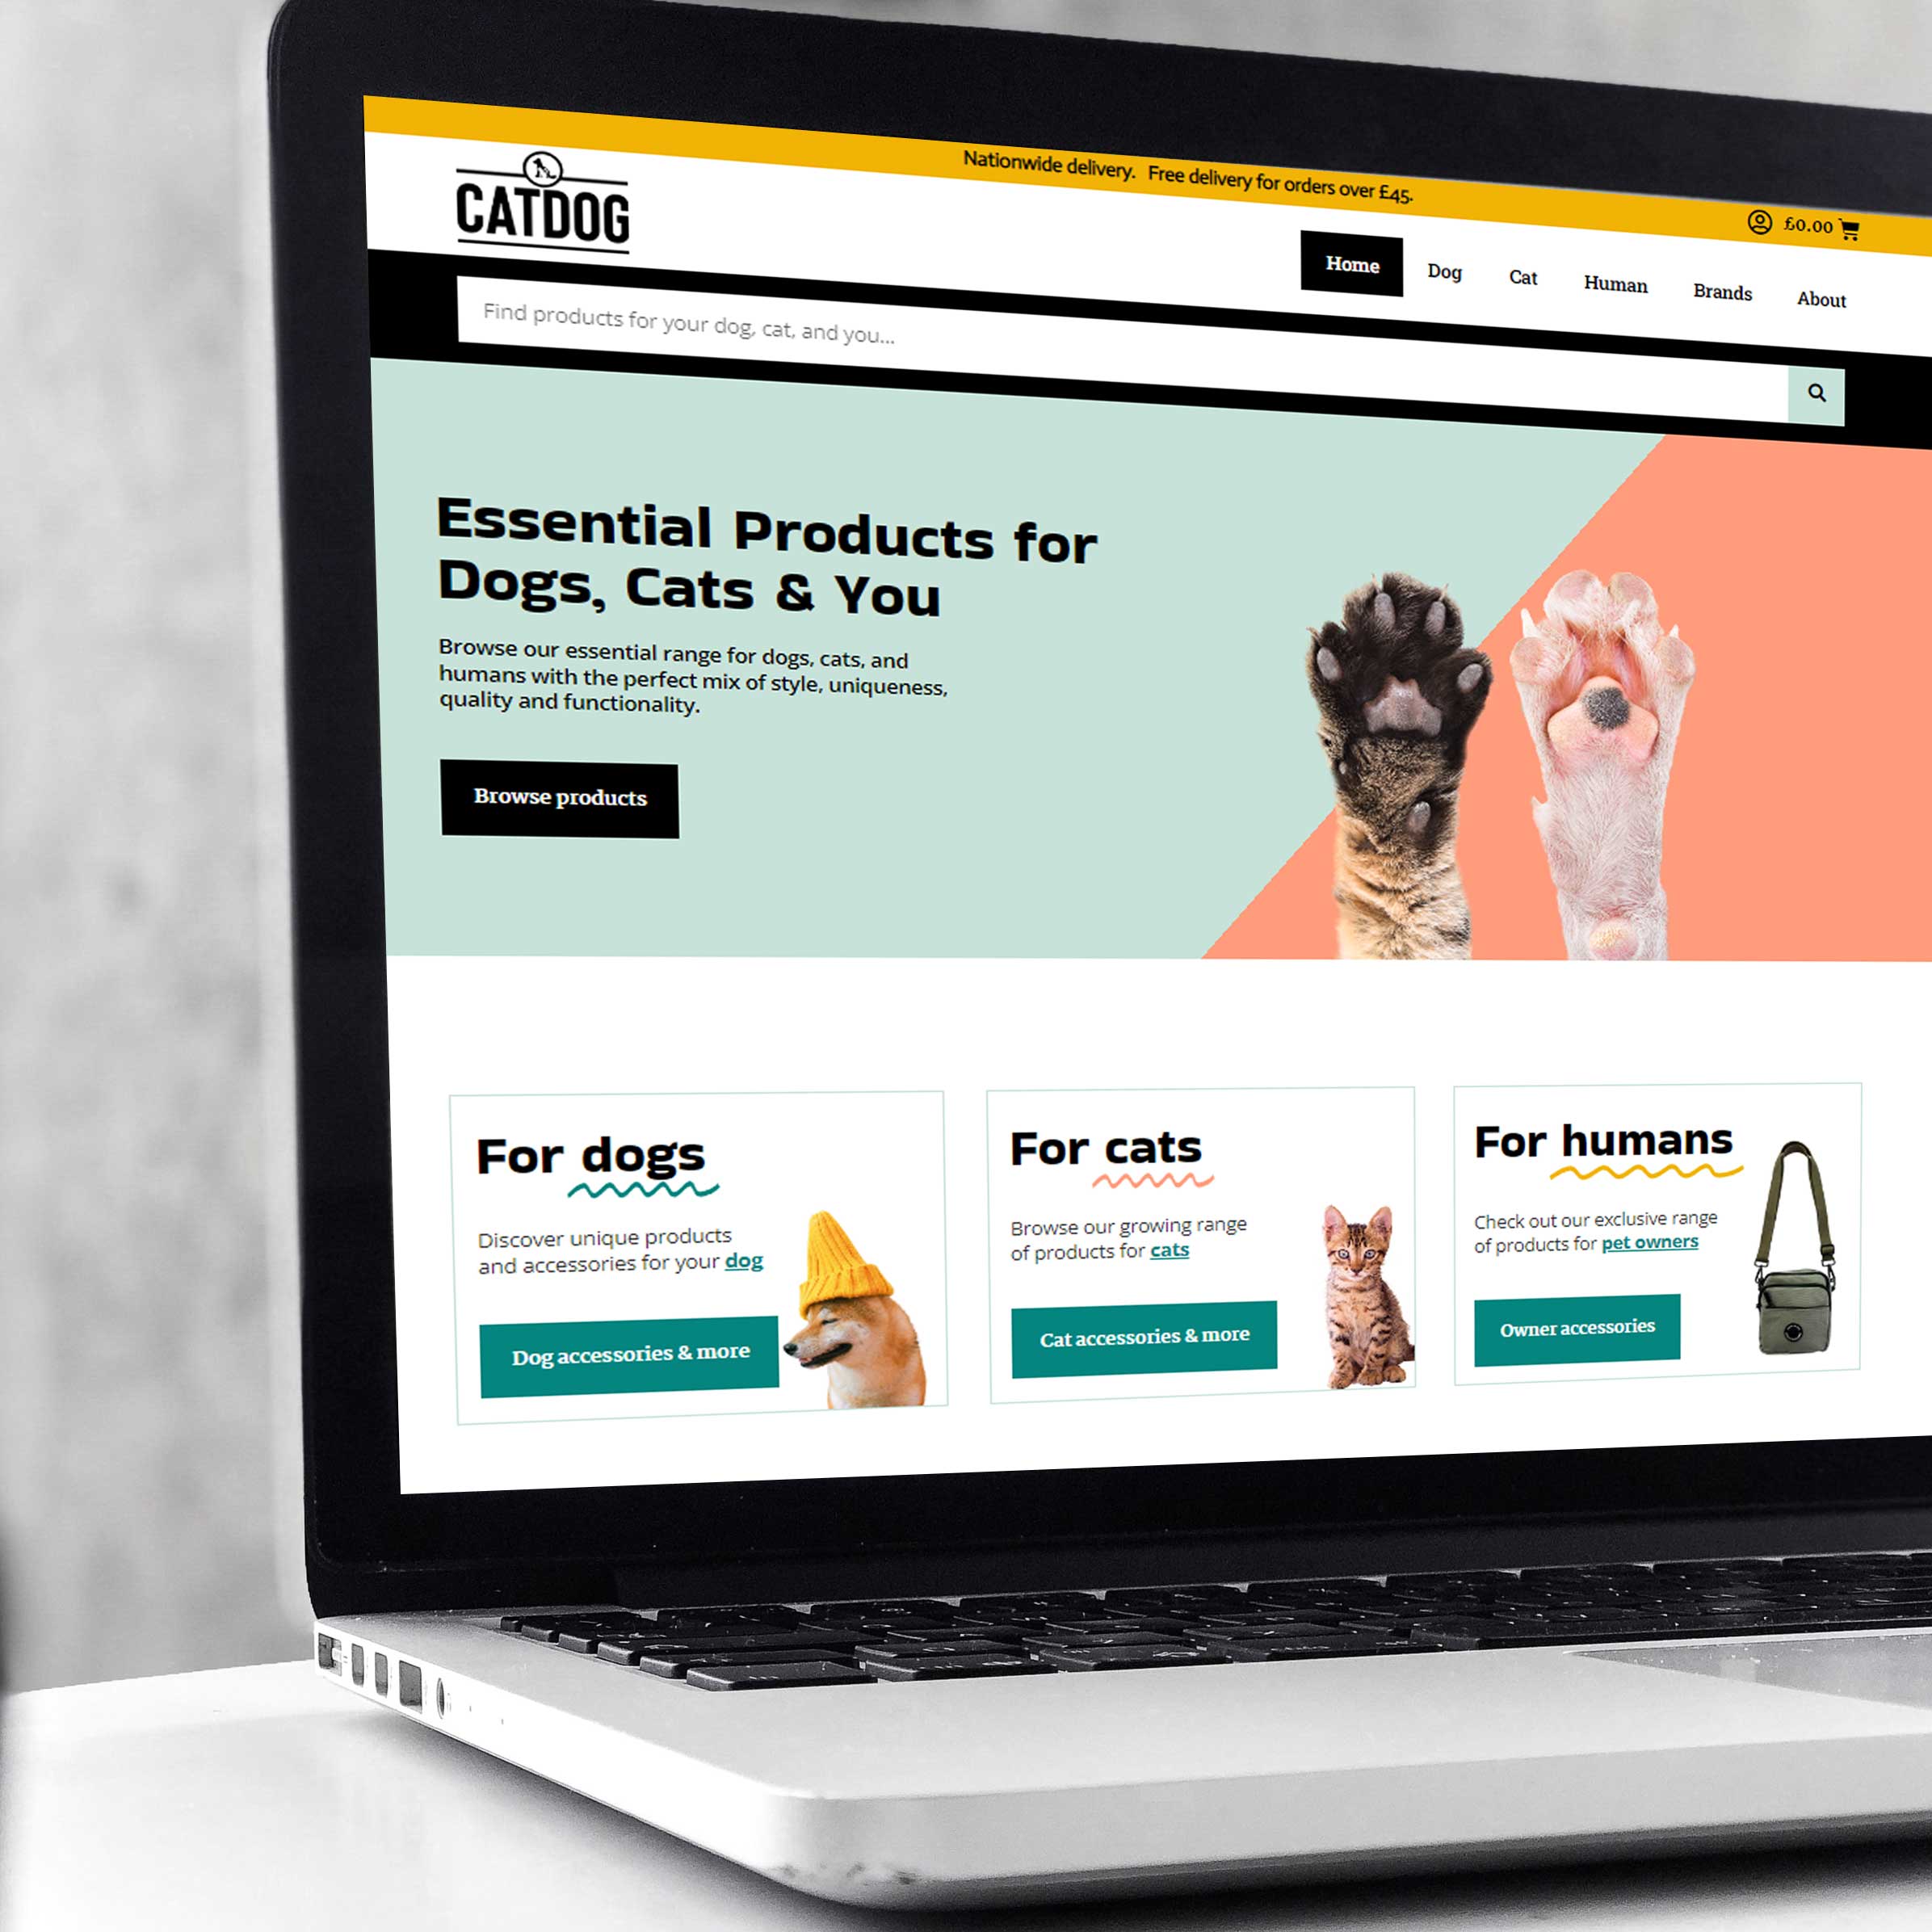 Snapshot of ecommerce website, Cat Dog Ltd - providers of products and accessories for cats, dogs, and owners